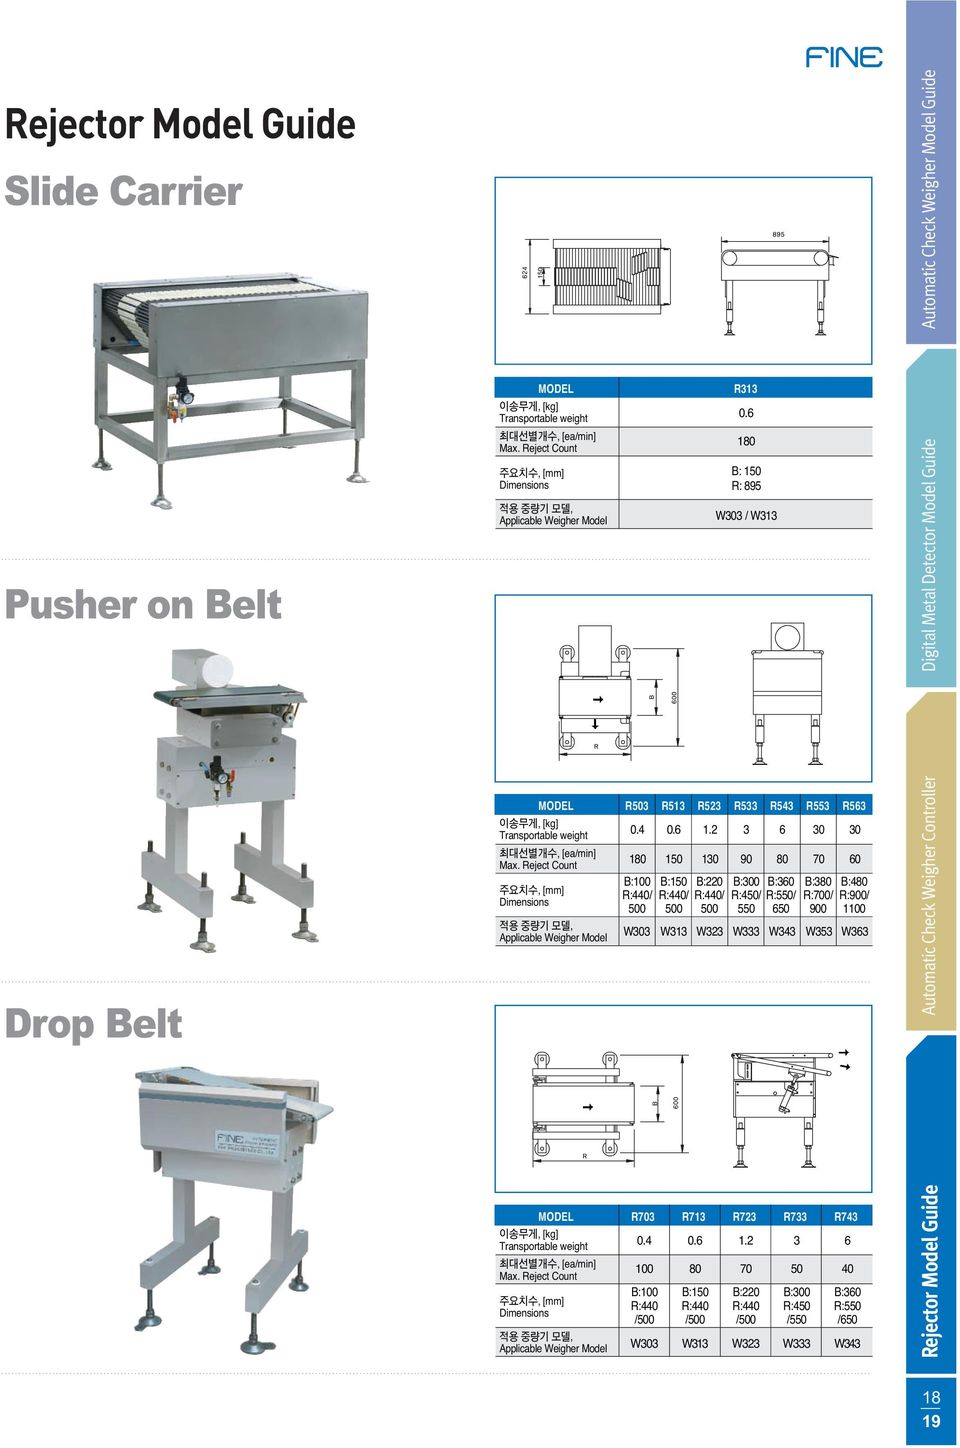 Reject Count, [mm] Dimensions, Applicable Weigher Model R503 R513 R523 R533 R543 R553 R563 0.4 0.6 1.